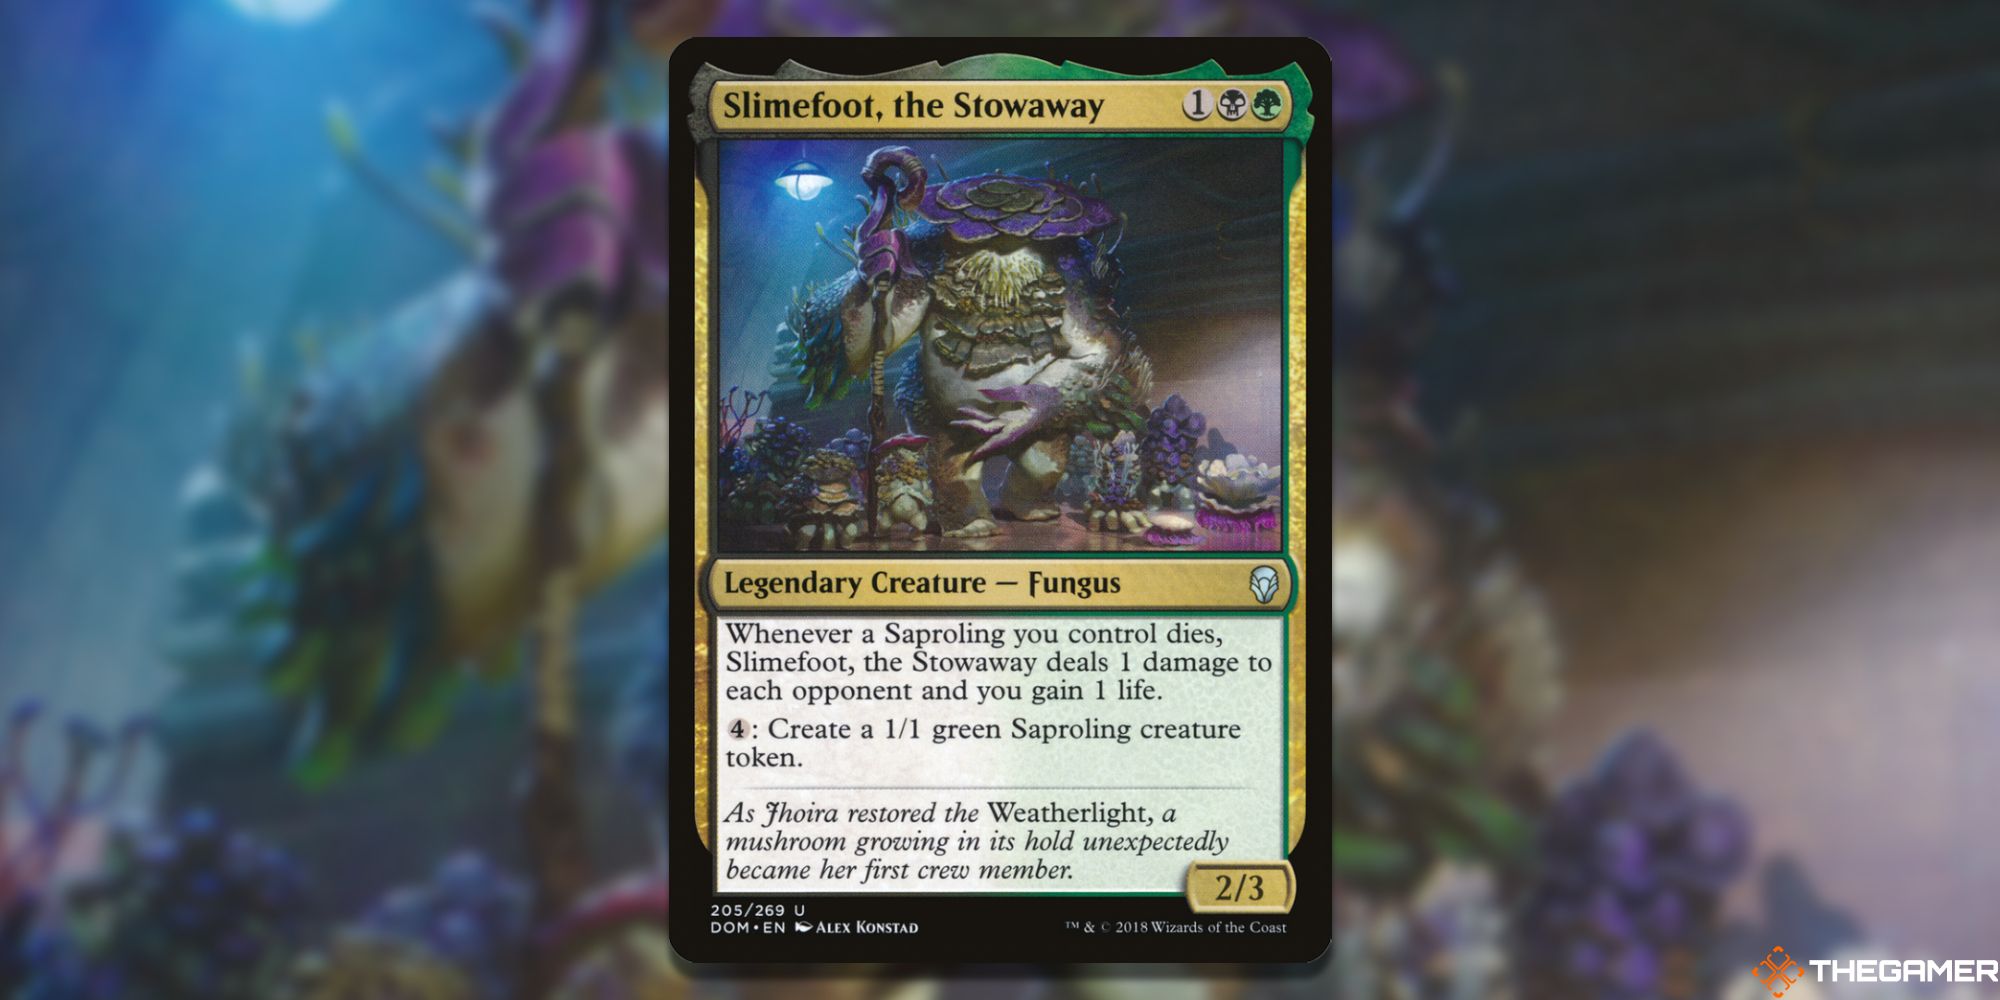 The card Slimefoot, the Stowaway from Magic: The Gathering